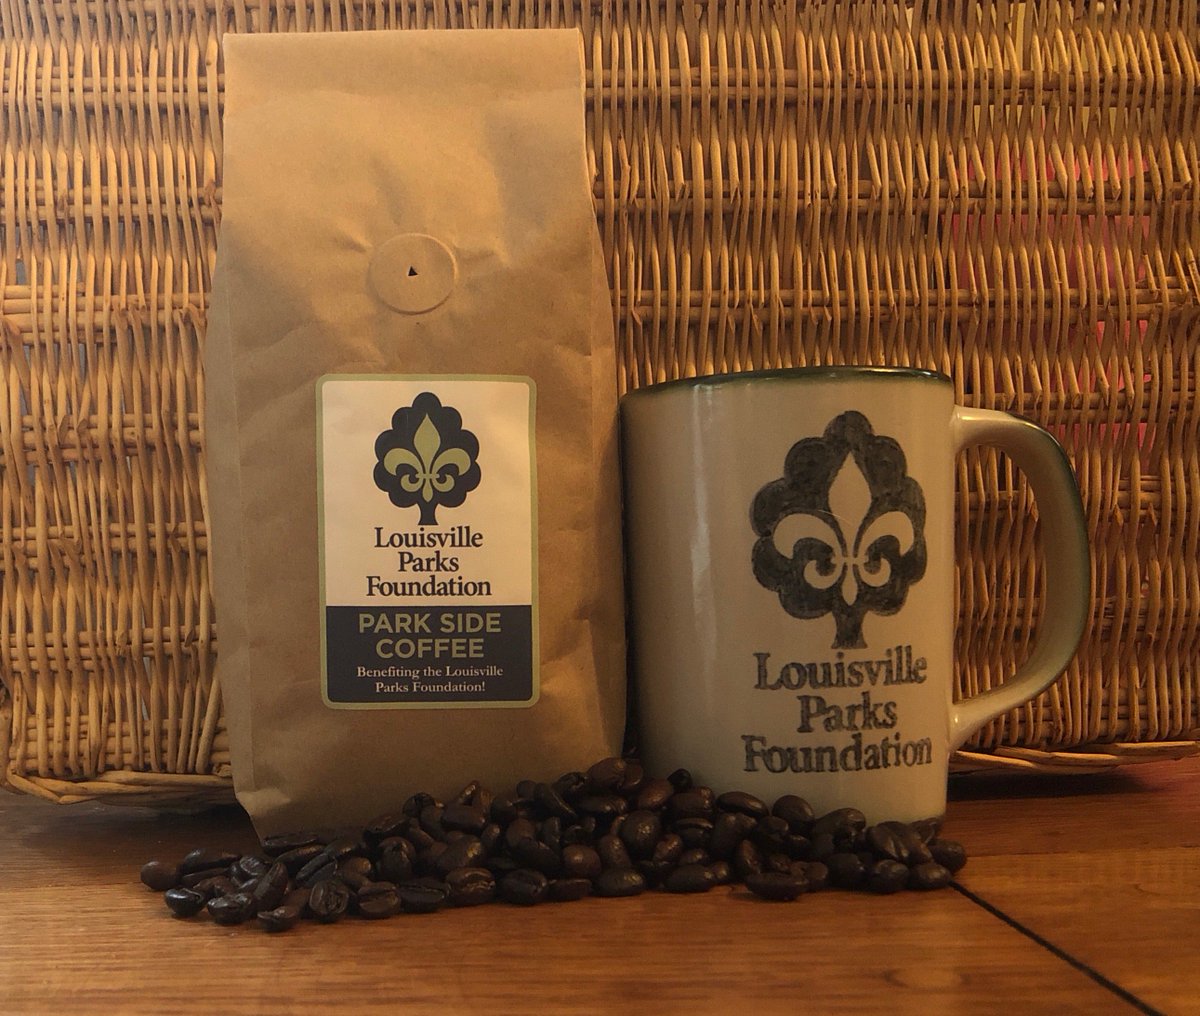 It's cold outside, but we have a solution. Grab a bad of Parkside Coffee at Fante's Coffee House and heat things up a little. Proceeds benefit our public parks! #giveplantplay #coffeeforacause ☕️